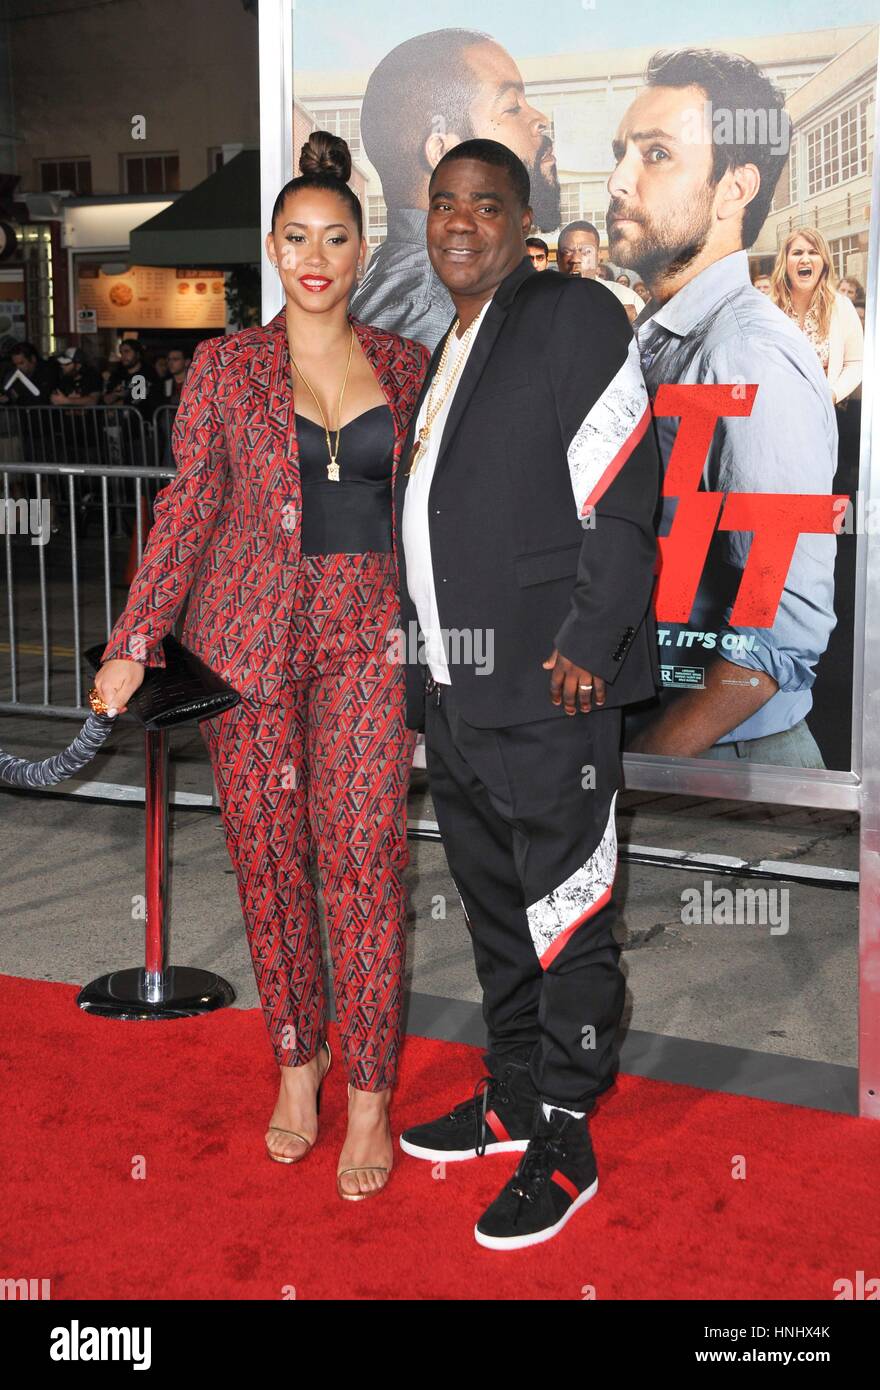 New York, NY, USA. 13th Feb, 2017. Tracy Morgan, Megan Wollover at arrivals for FIST FIGHT World Premiere, Regency Westwood Village Theatre, New York, NY February 13, 2017. Credit: Elizabeth Goodenough/Everett Collection/Alamy Live News Stock Photo